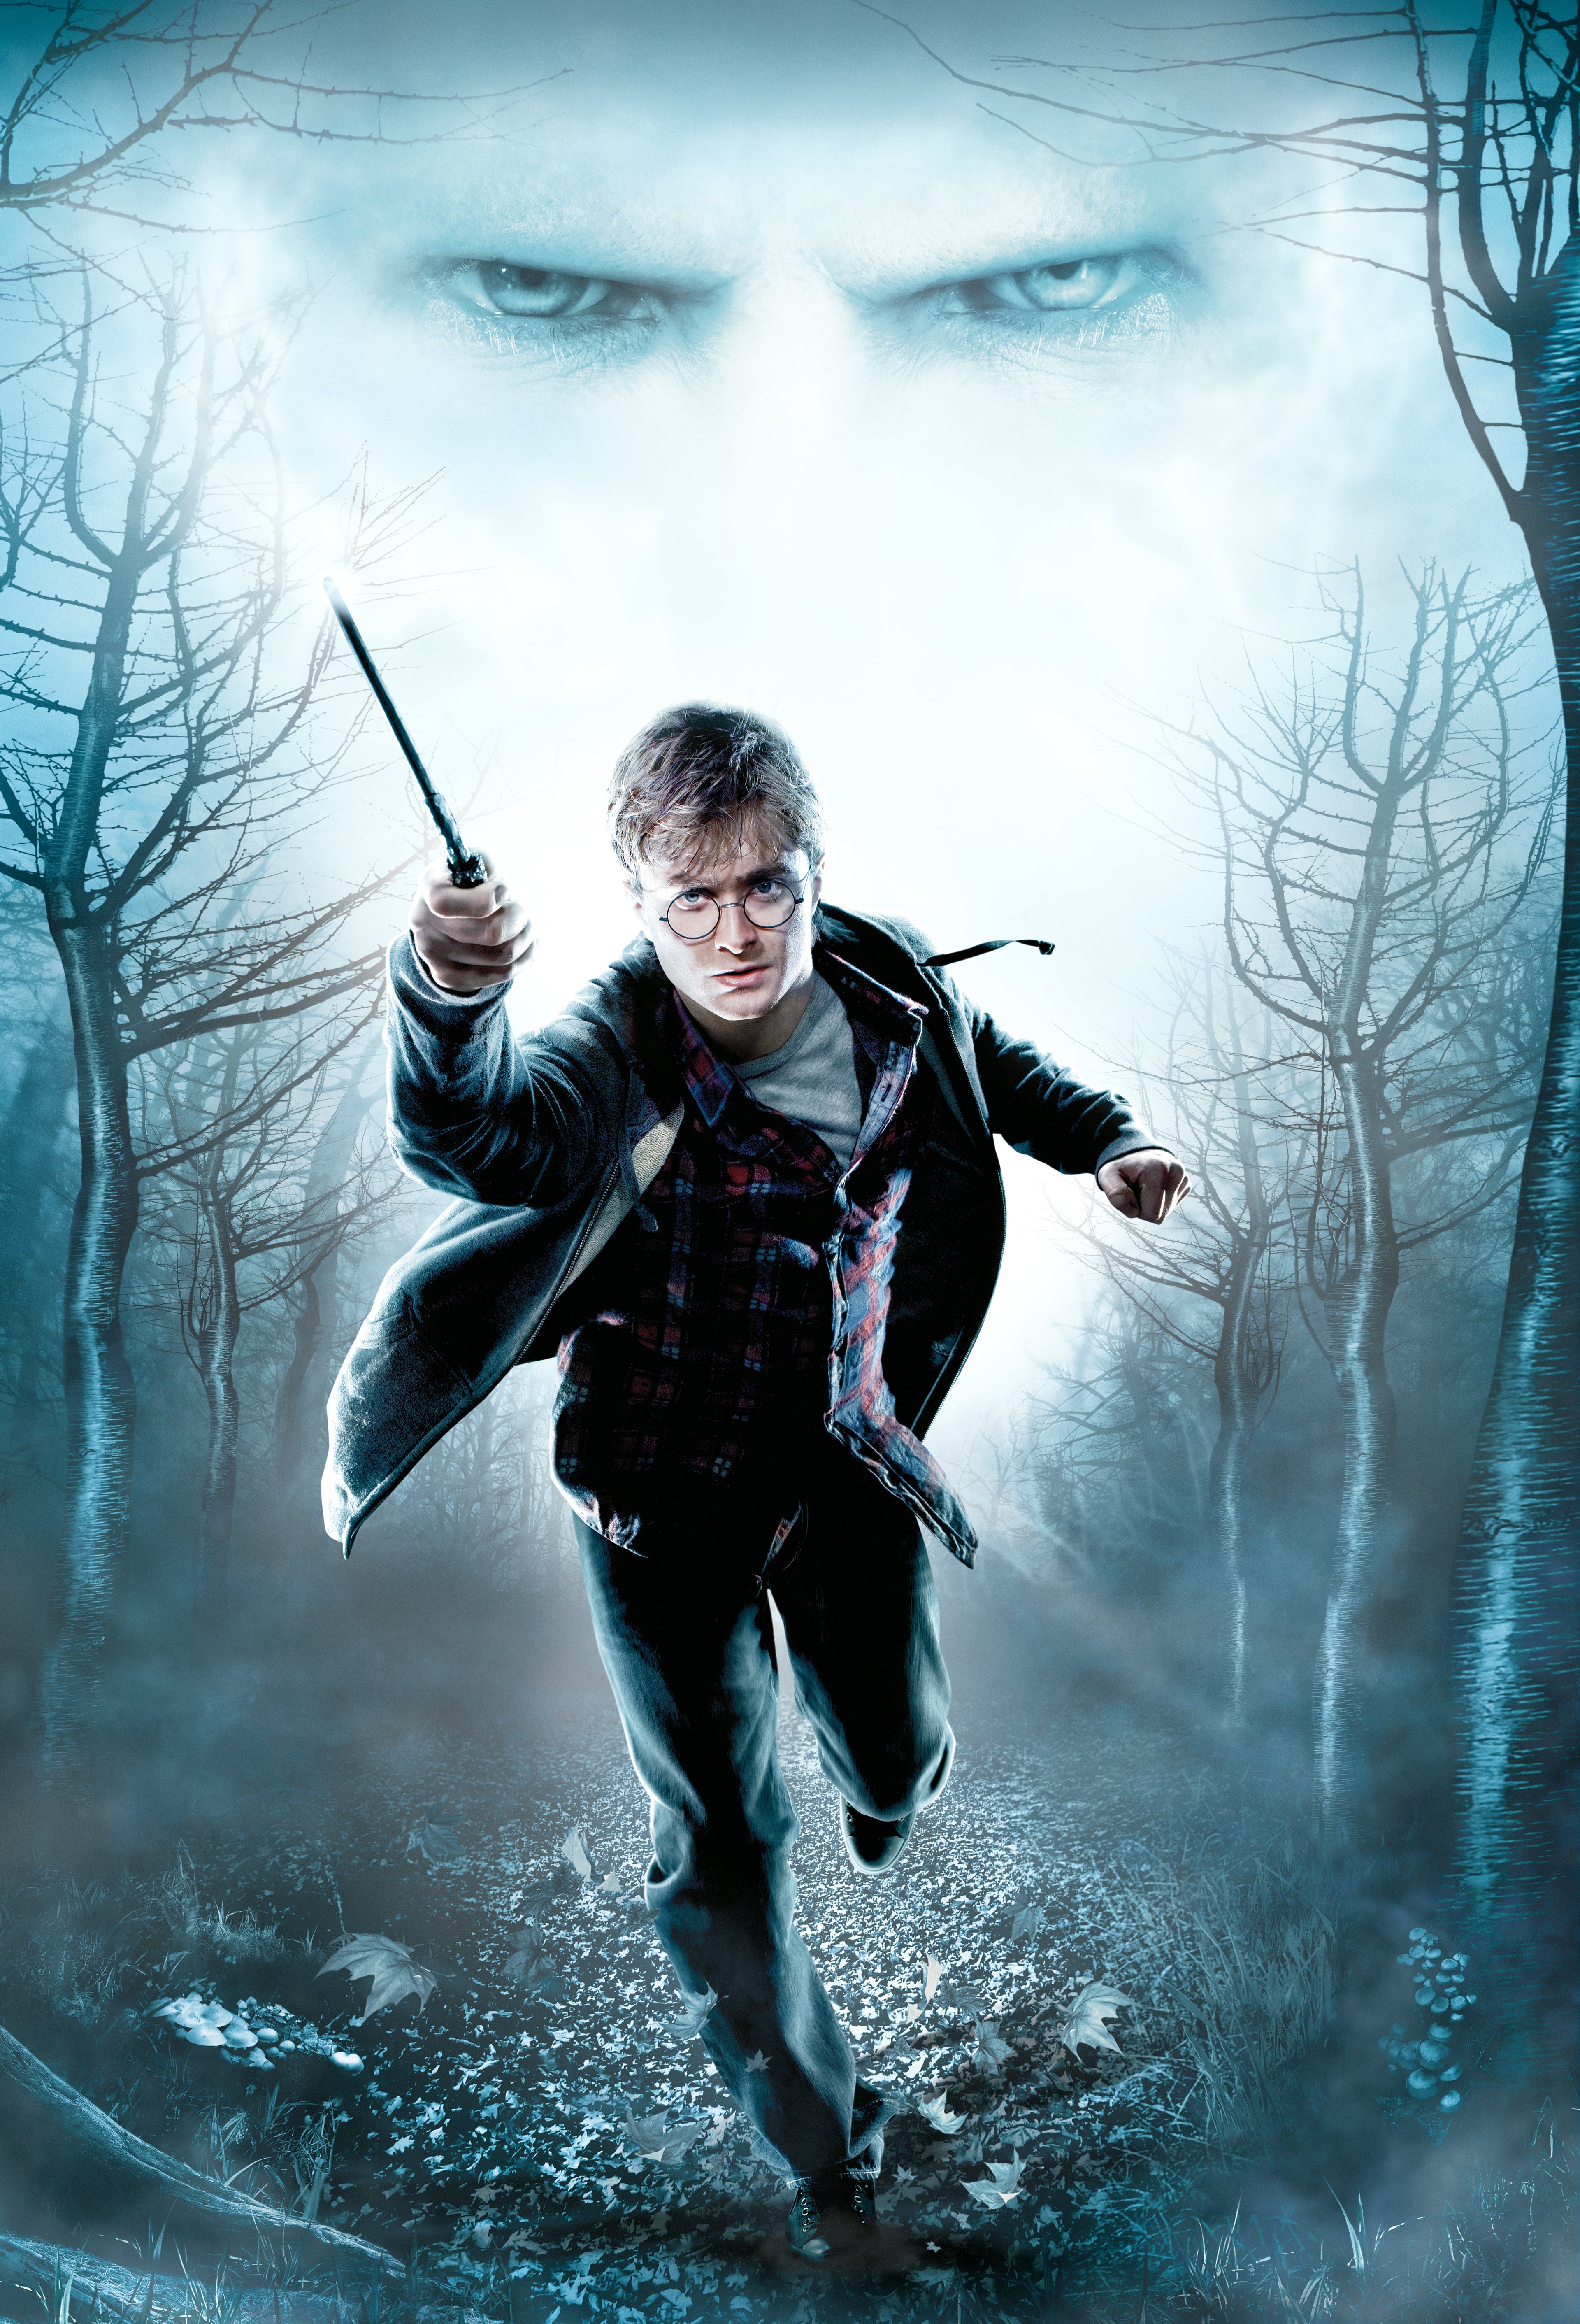 Harry Potter and the Deathly Hallows download the new for windows